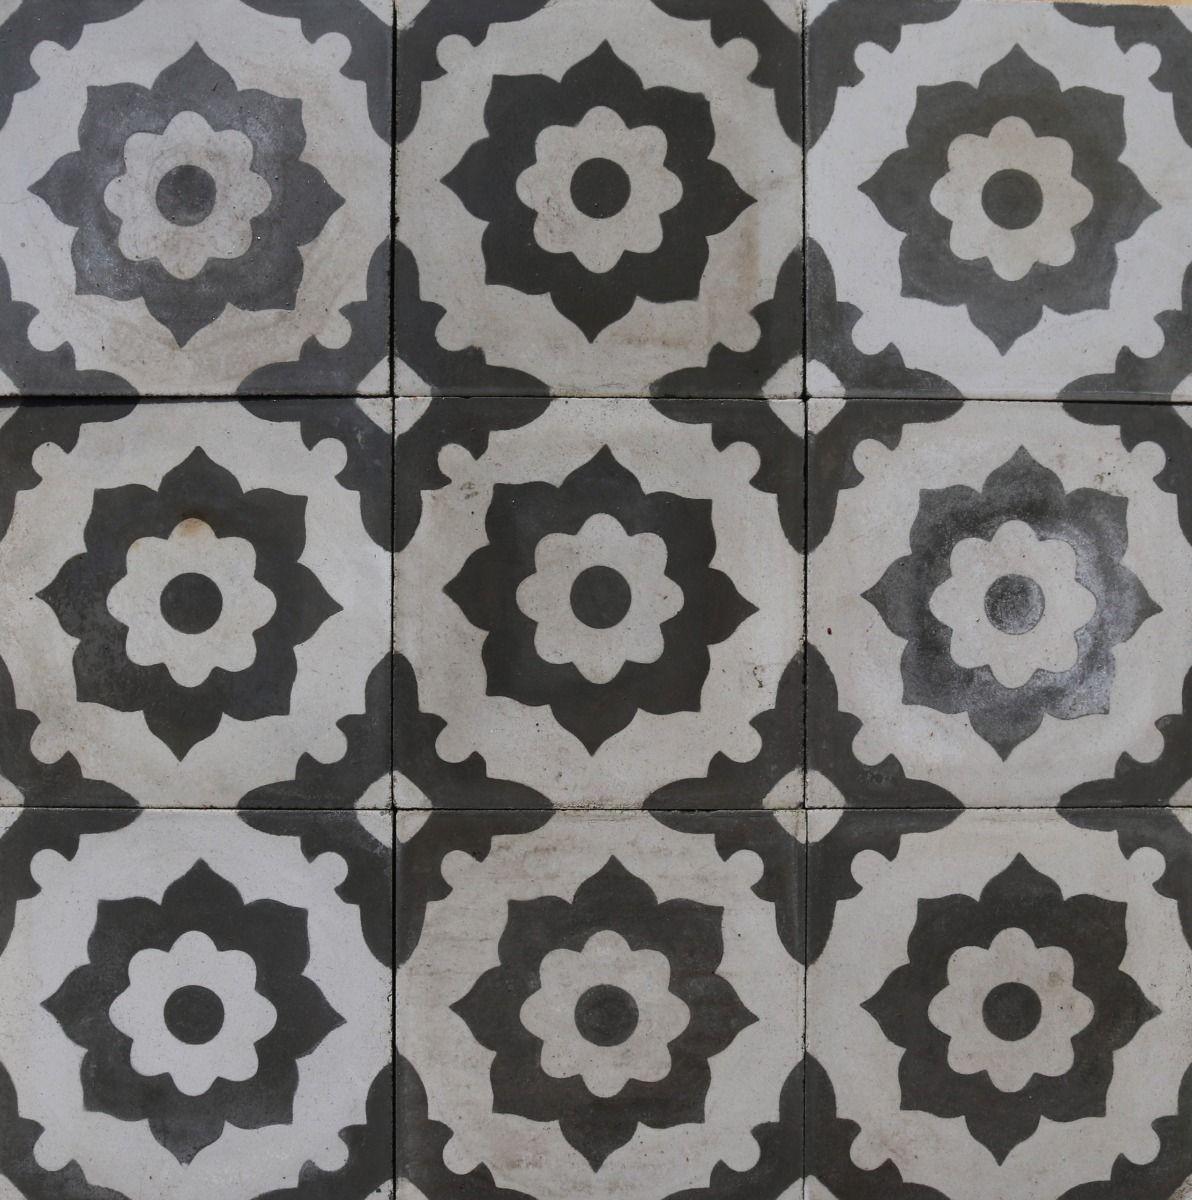 A batch of 31 reclaimed encaustic cement floor tiles. These tiles will cover 1.25 m2 or 13.5 ft2